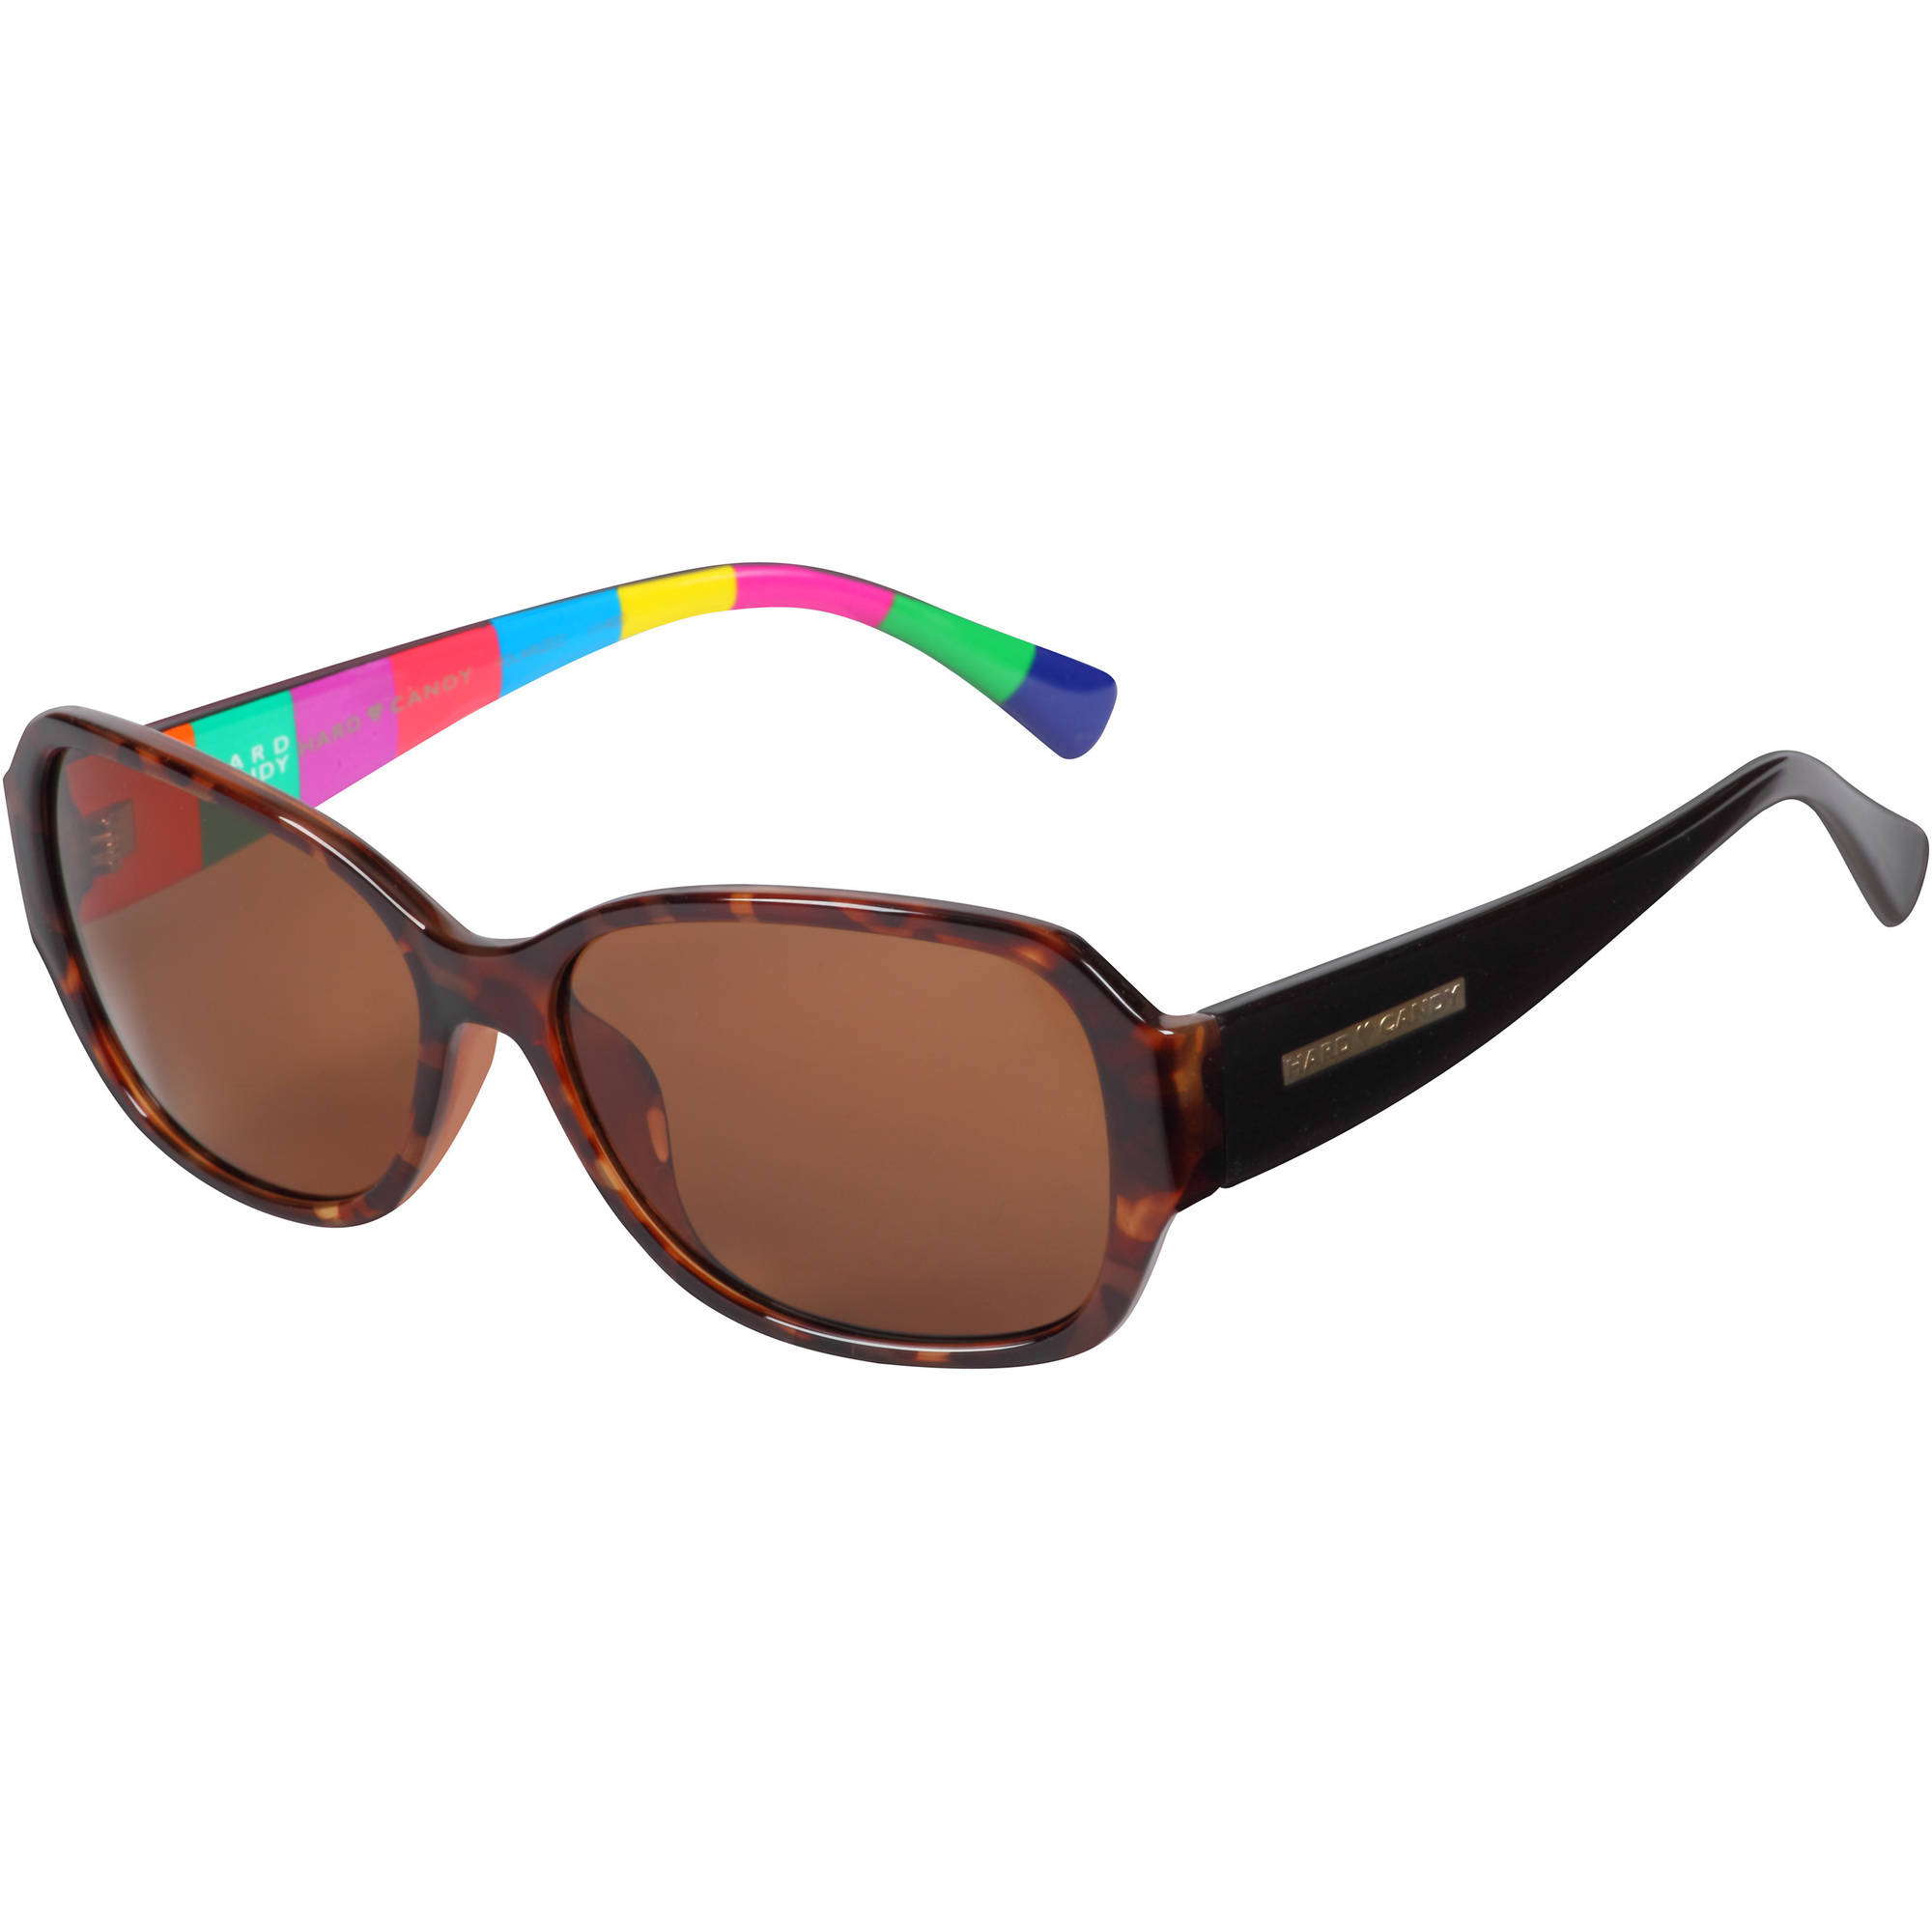 Hard Candy Womens Rx'able Sunglasses, Hs14, Tortoise Patterned, 57-15-138, with Case - image 1 of 13